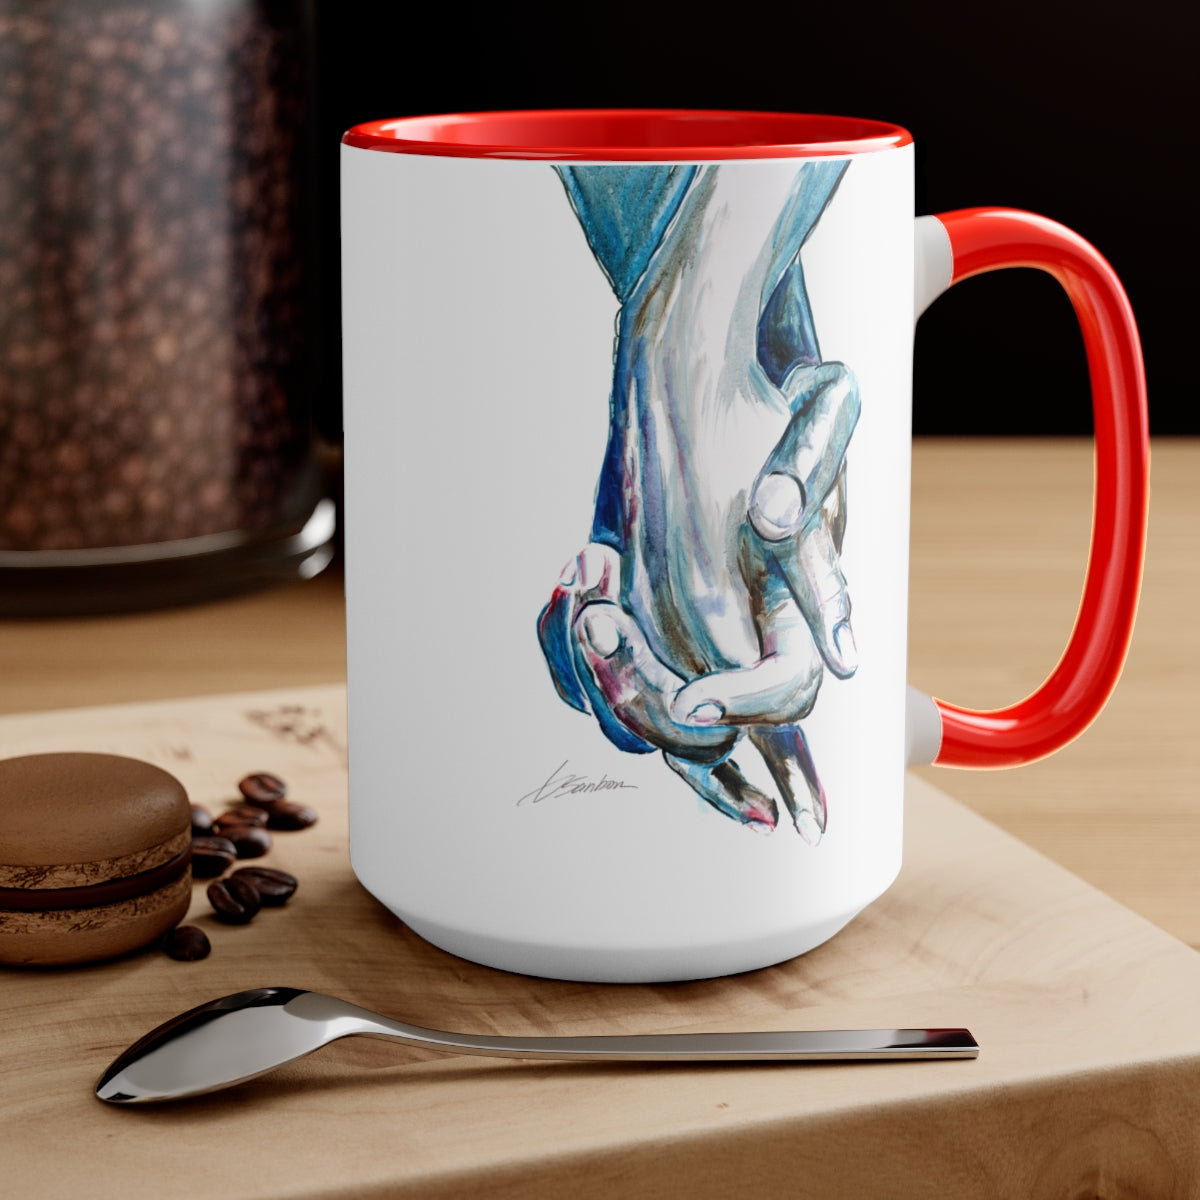 Love is Love - Men Holding Hands - Two-Tone Coffee Mugs, 15oz